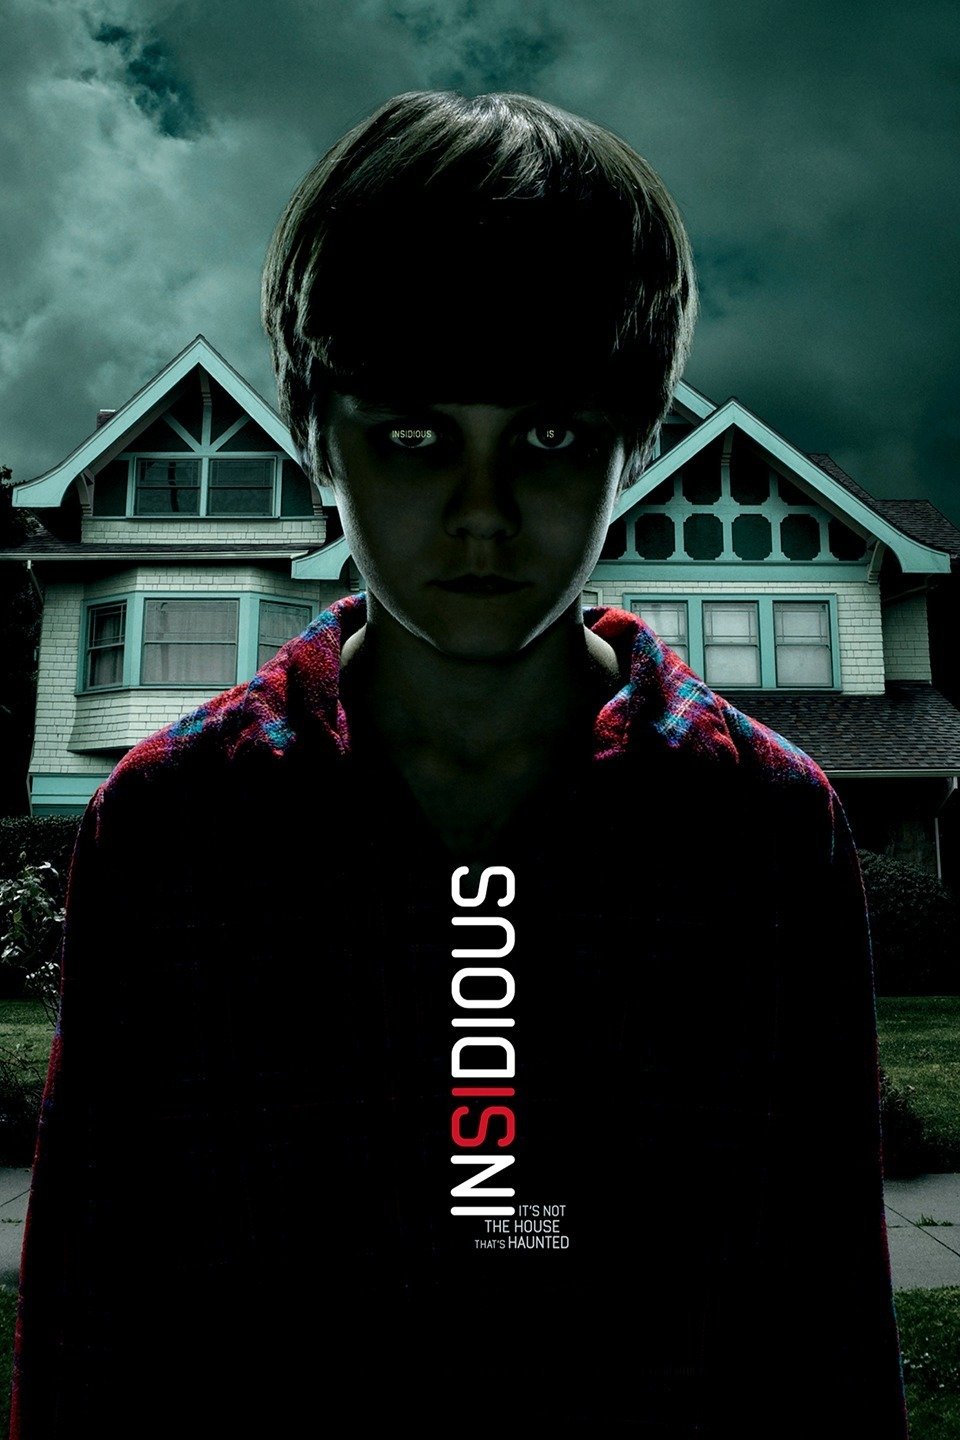 insidious movie reviews rotten tomatoes